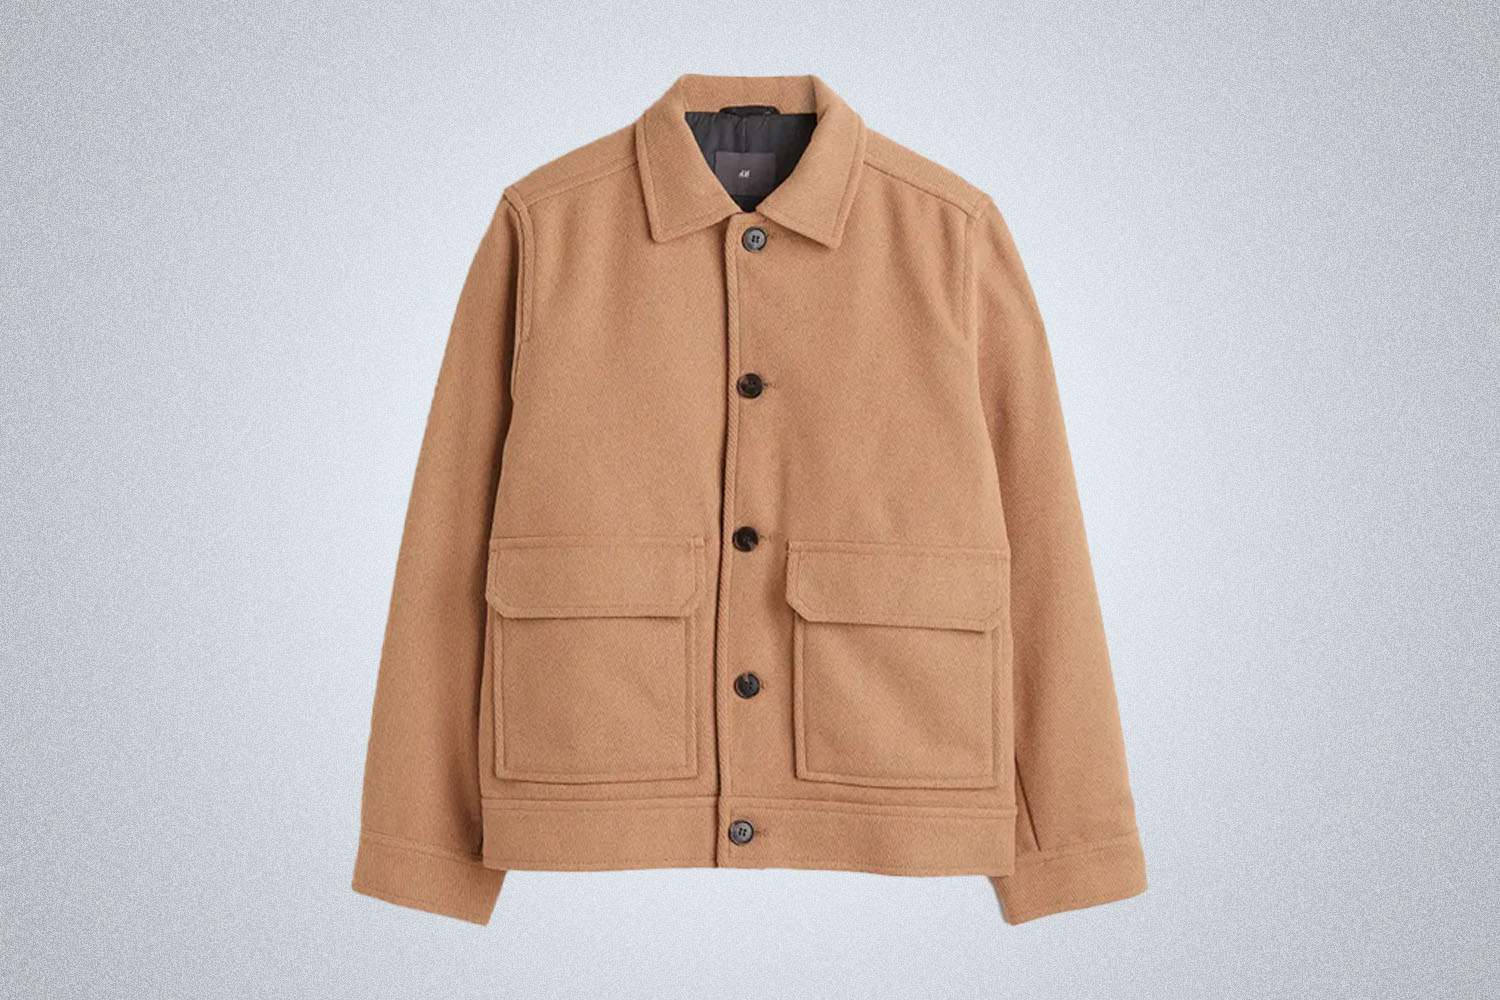 a tan wool jacket from H&M on a grey background